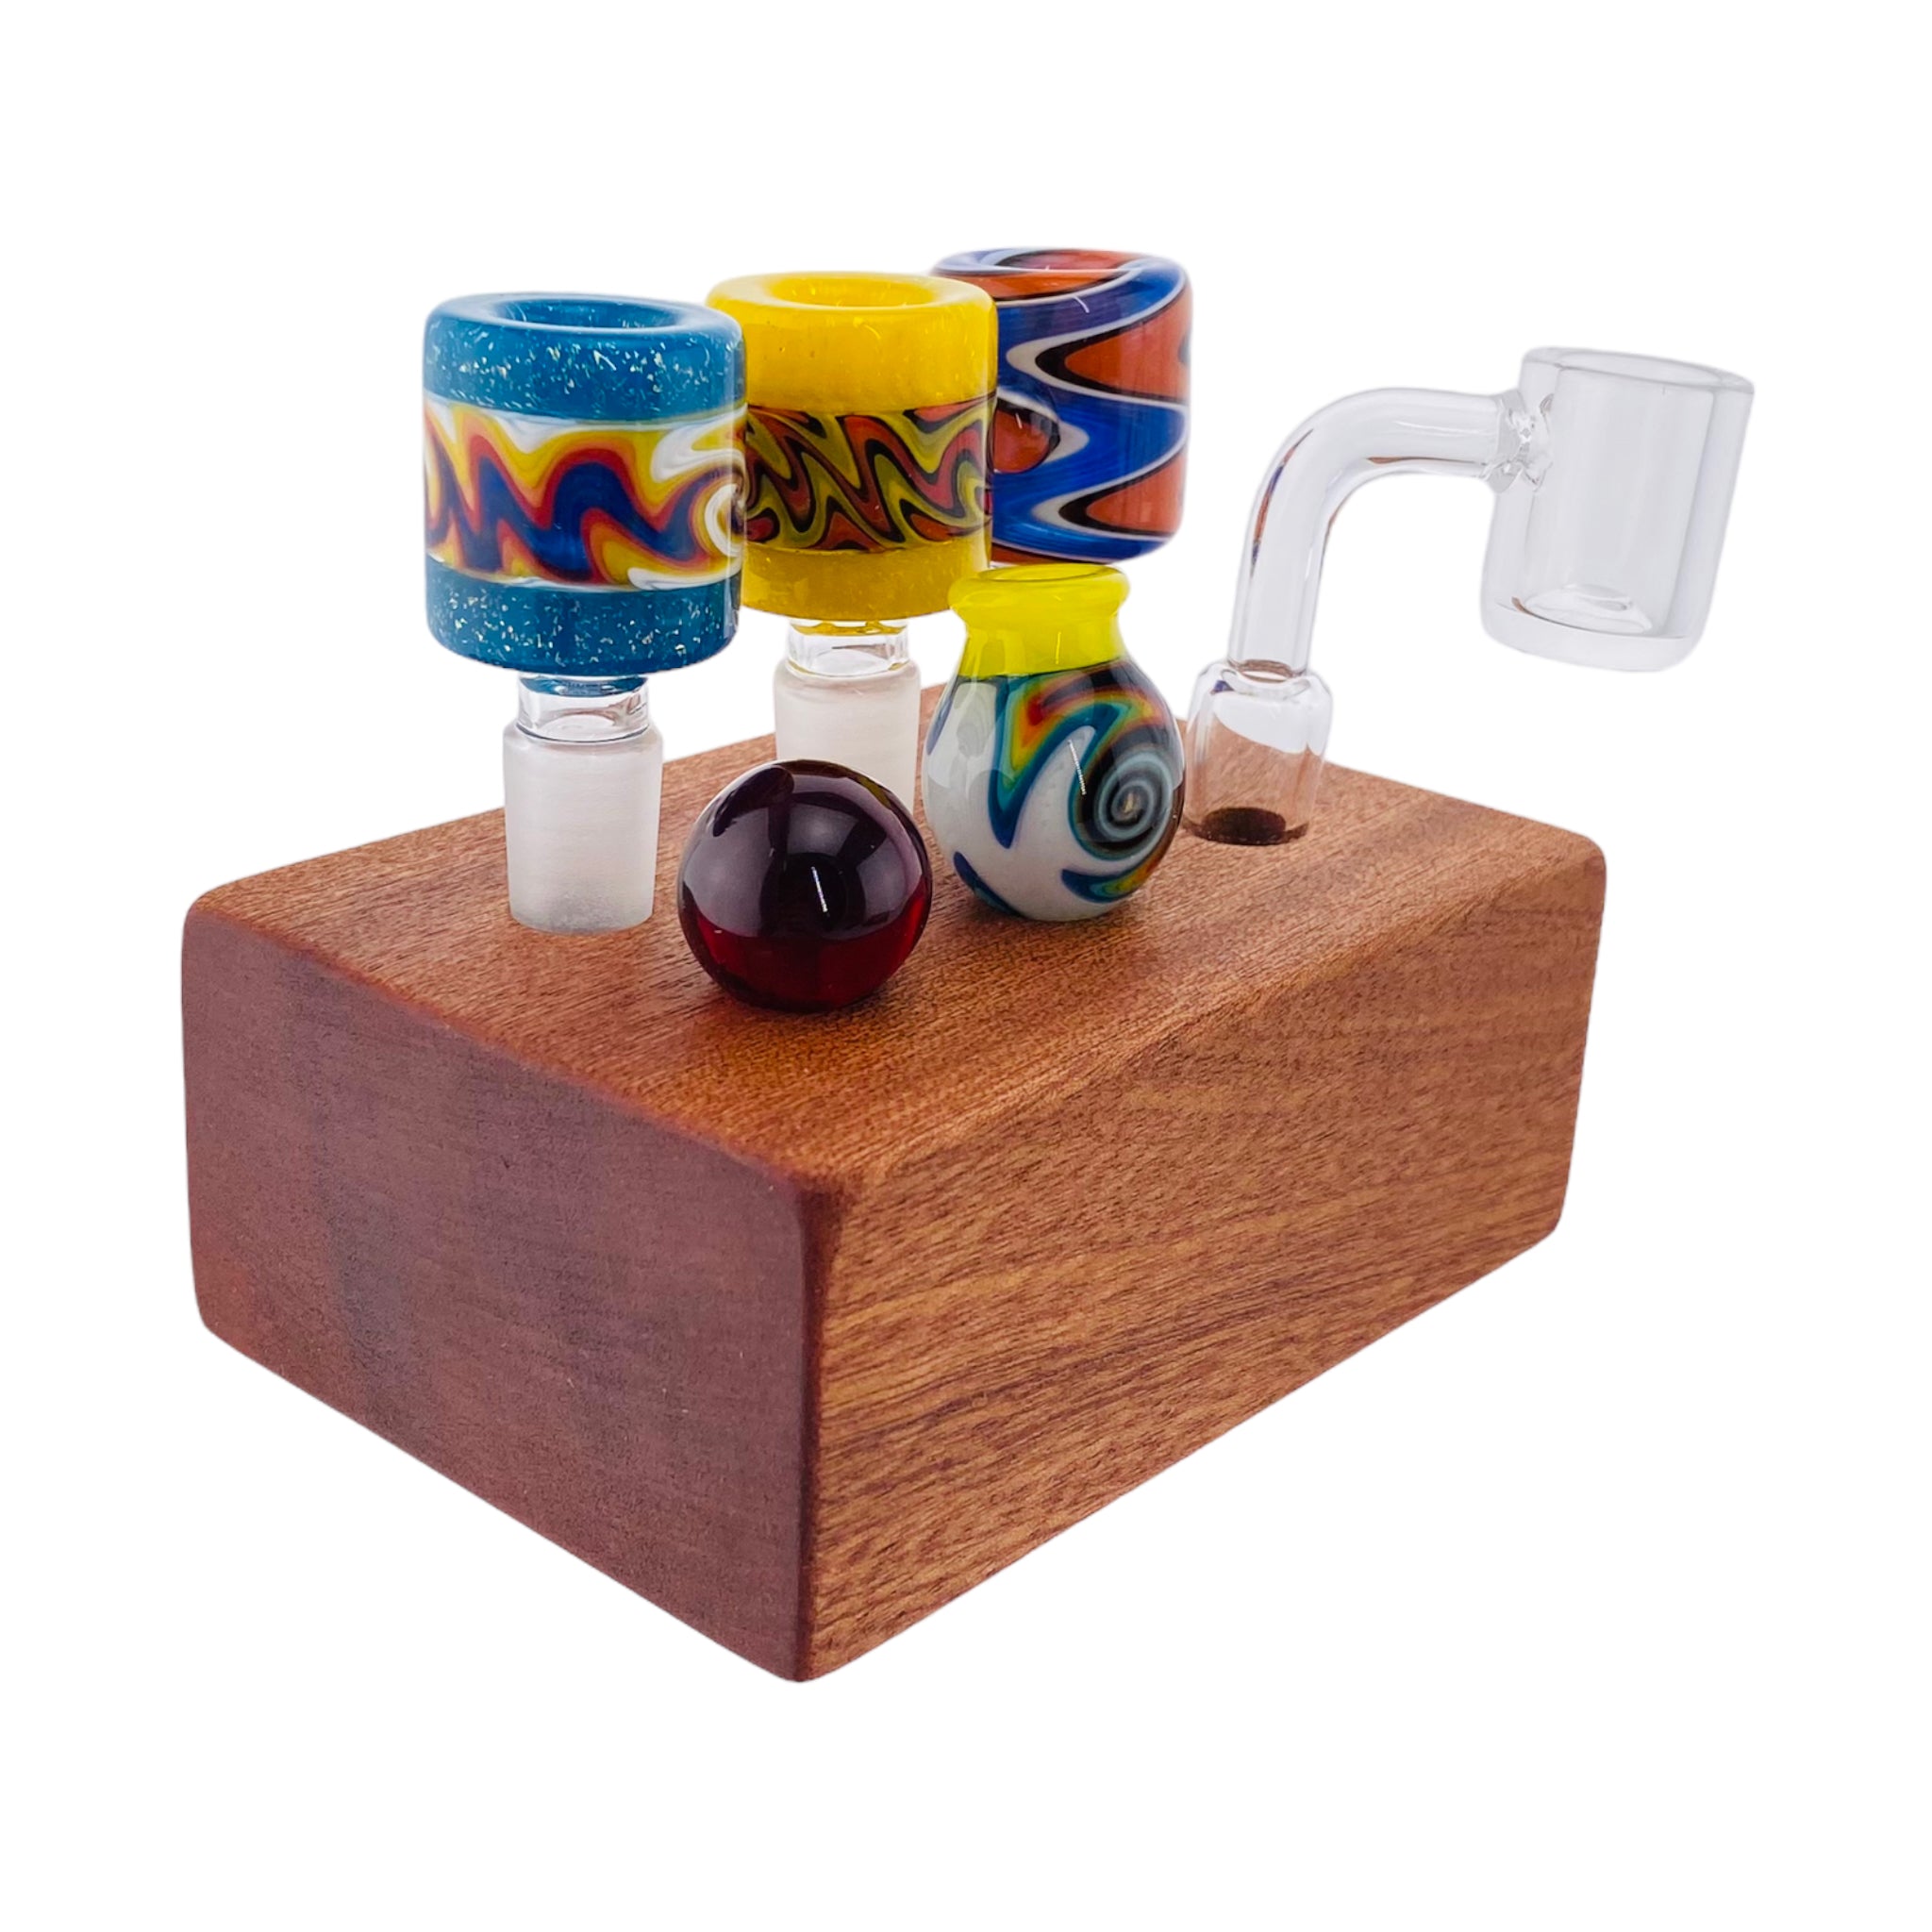 6 Hole Wood Display Stand Holder For 14mm Bong Bowl Pieces Or Quartz Bangers - Mahogany Block